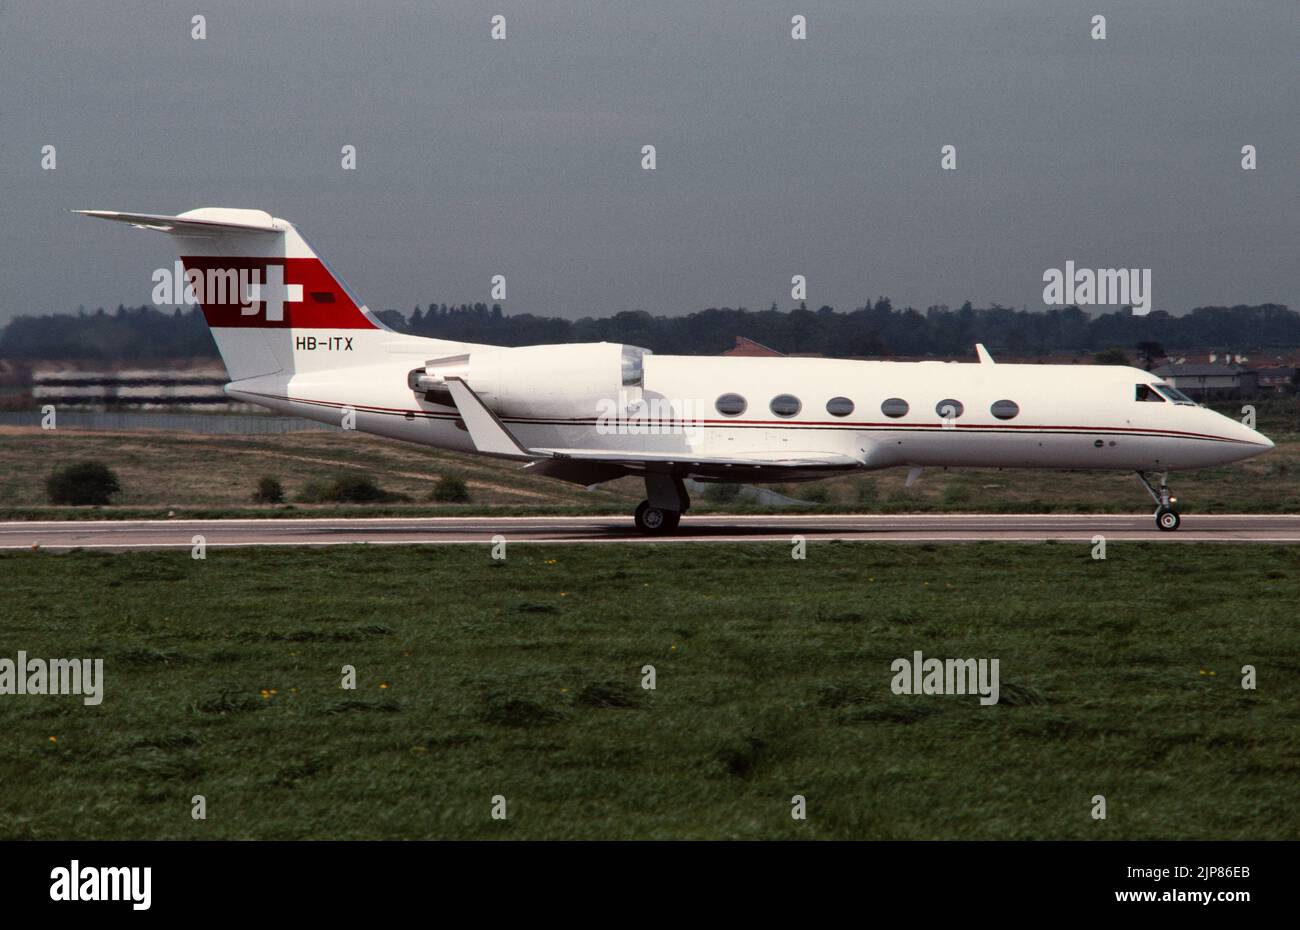 A Gulfstream G-IV Business, executive, private, corporate, Jet, registered in Switzerland as HB-ITX. Stock Photo